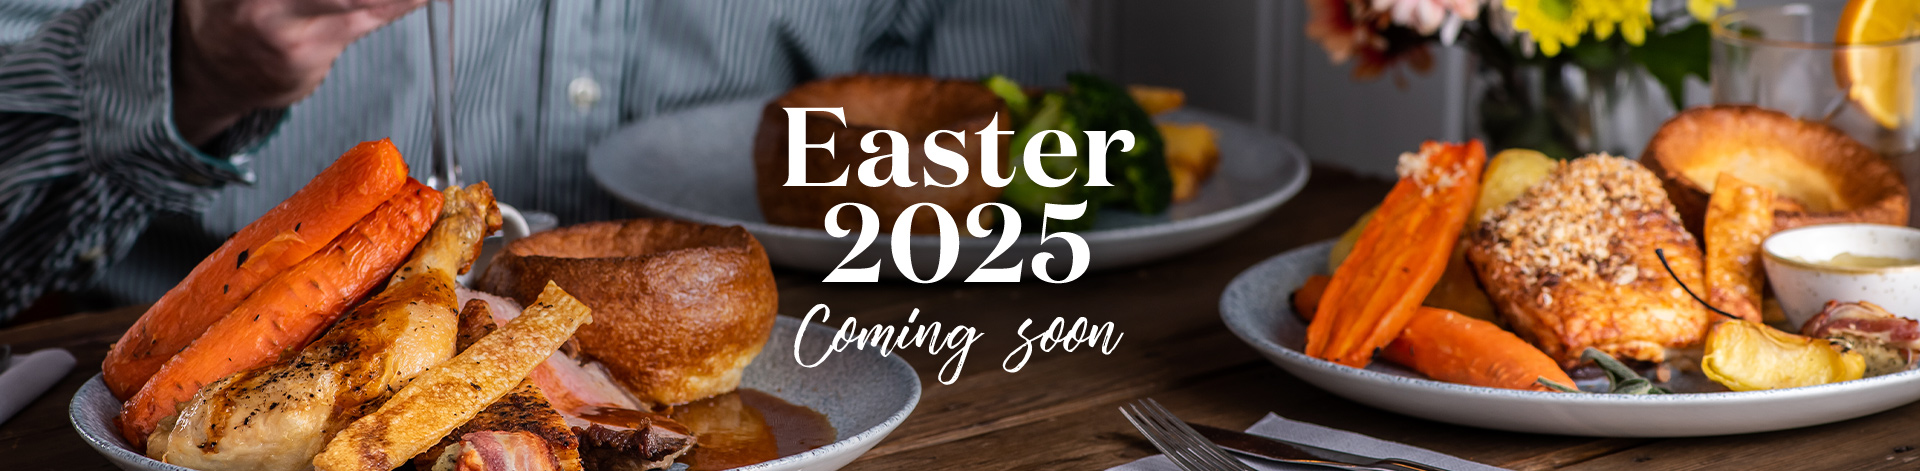 Easter at The King's Head, North Weald in Epping